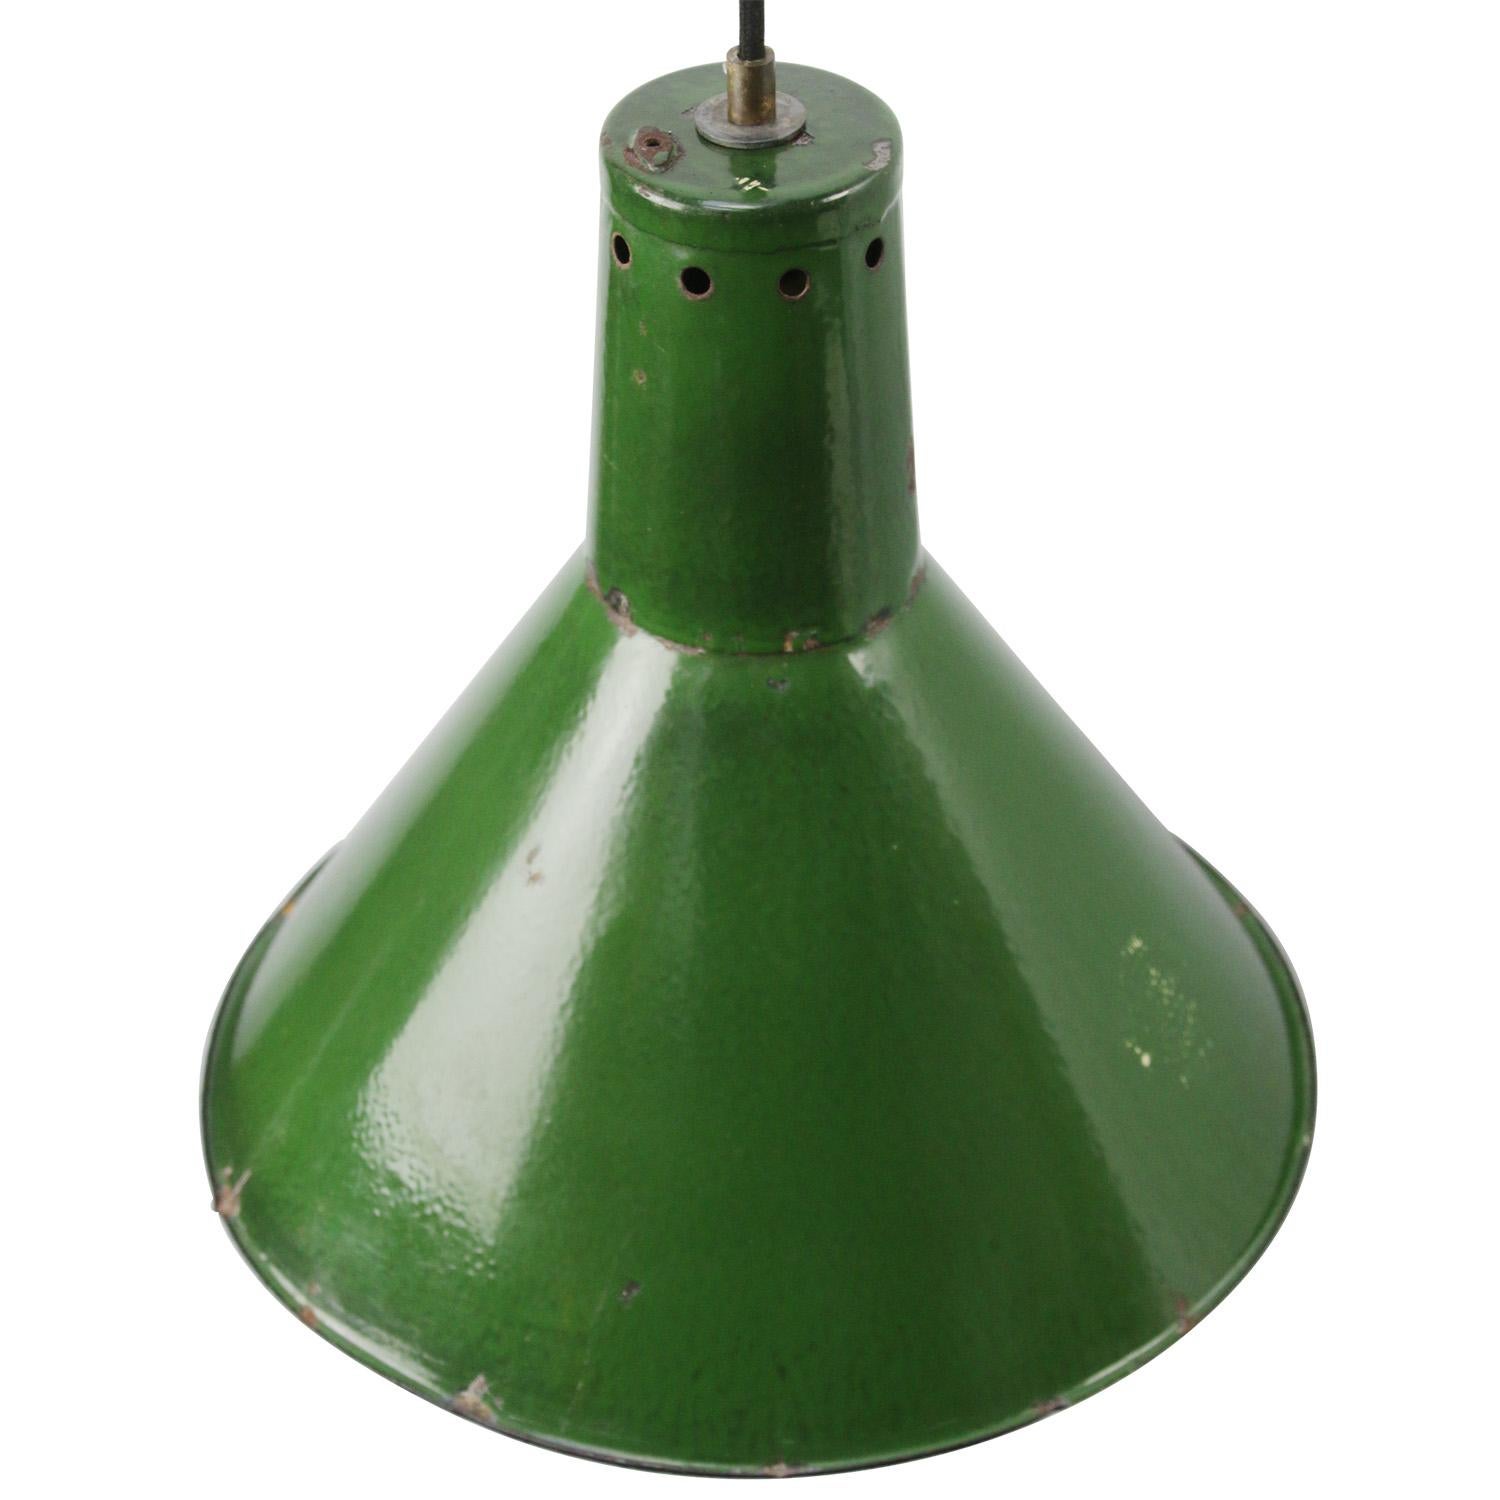 Green enamel factory pendant from the Ukraine.
White interior.

Weight: 2.0 kg / 4.4 lb

Priced per individual item. All lamps have been made suitable by international standards for incandescent light bulbs, energy-efficient and LED bulbs.